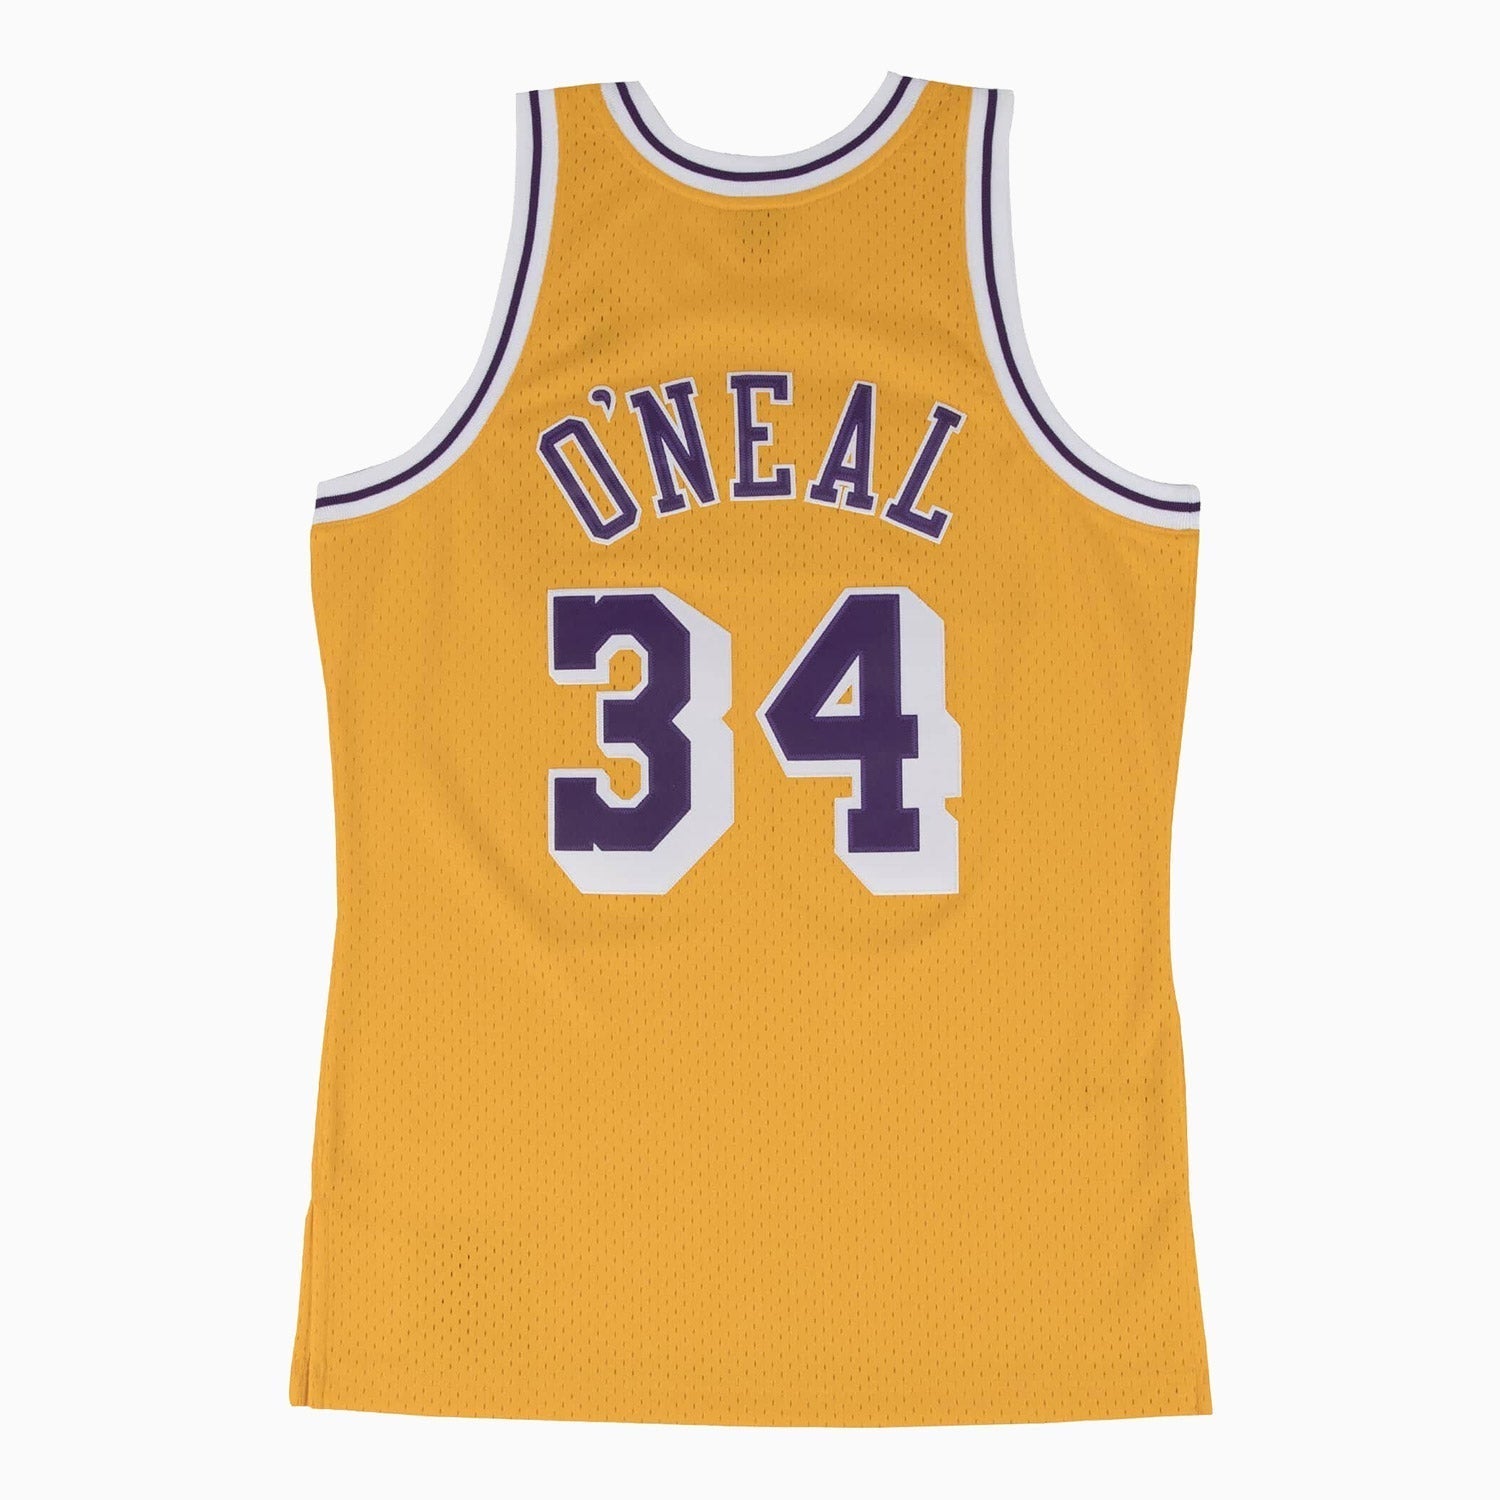 mitchell-and-ness-swingman-shaquille-oneal-los-angeles-lakers-nba-1996-97-jersey-smjygs18177-lalltgd96son